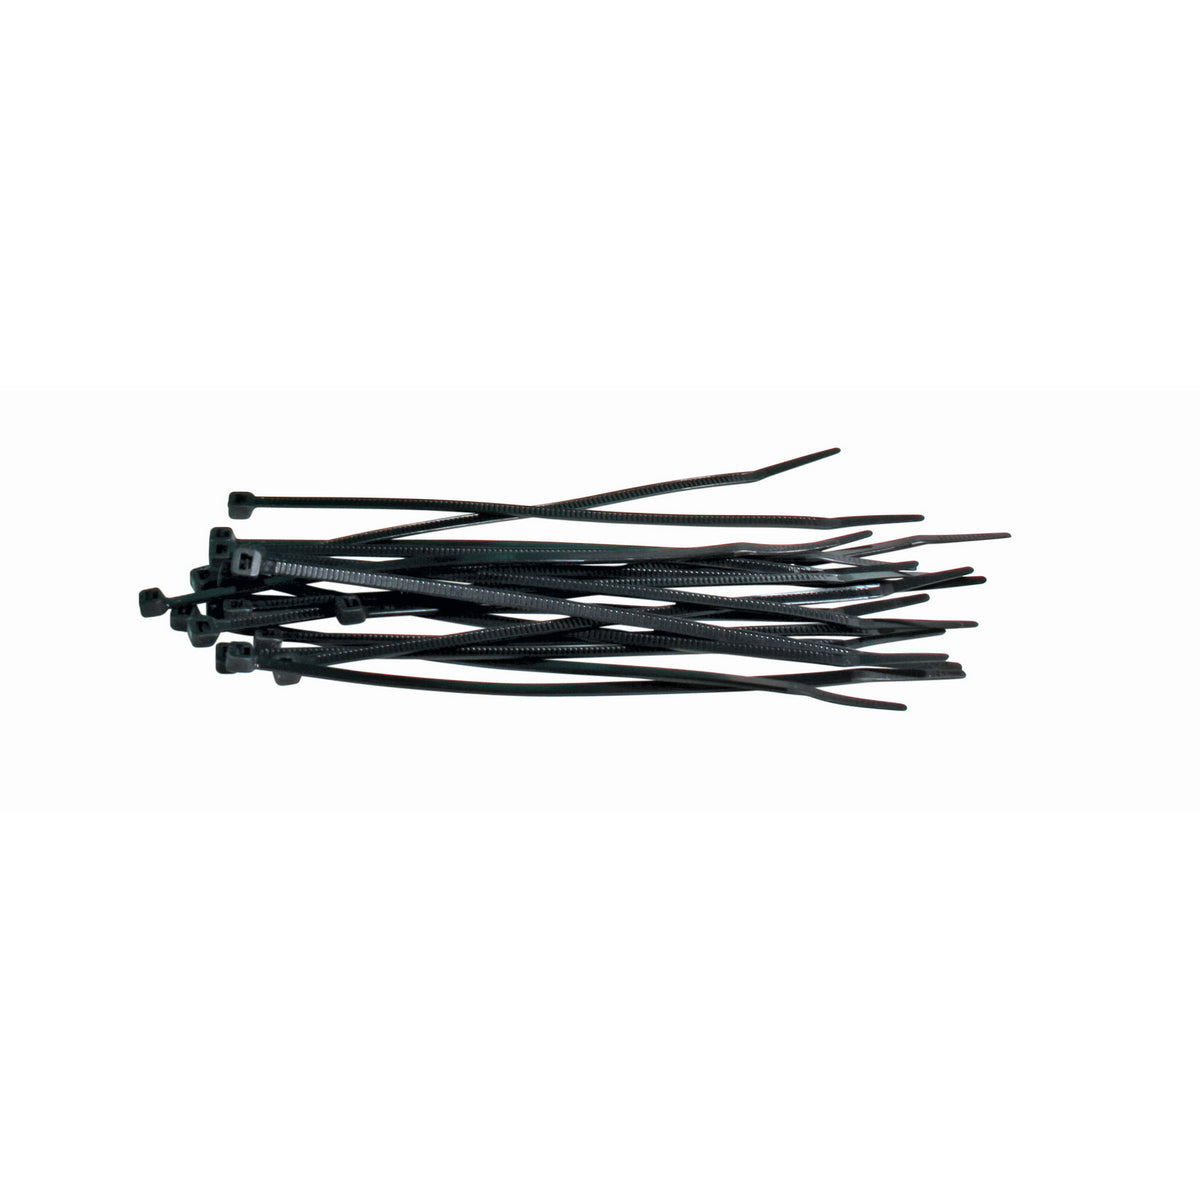 Cable Ties Black - 370 mm x 4.8 mm